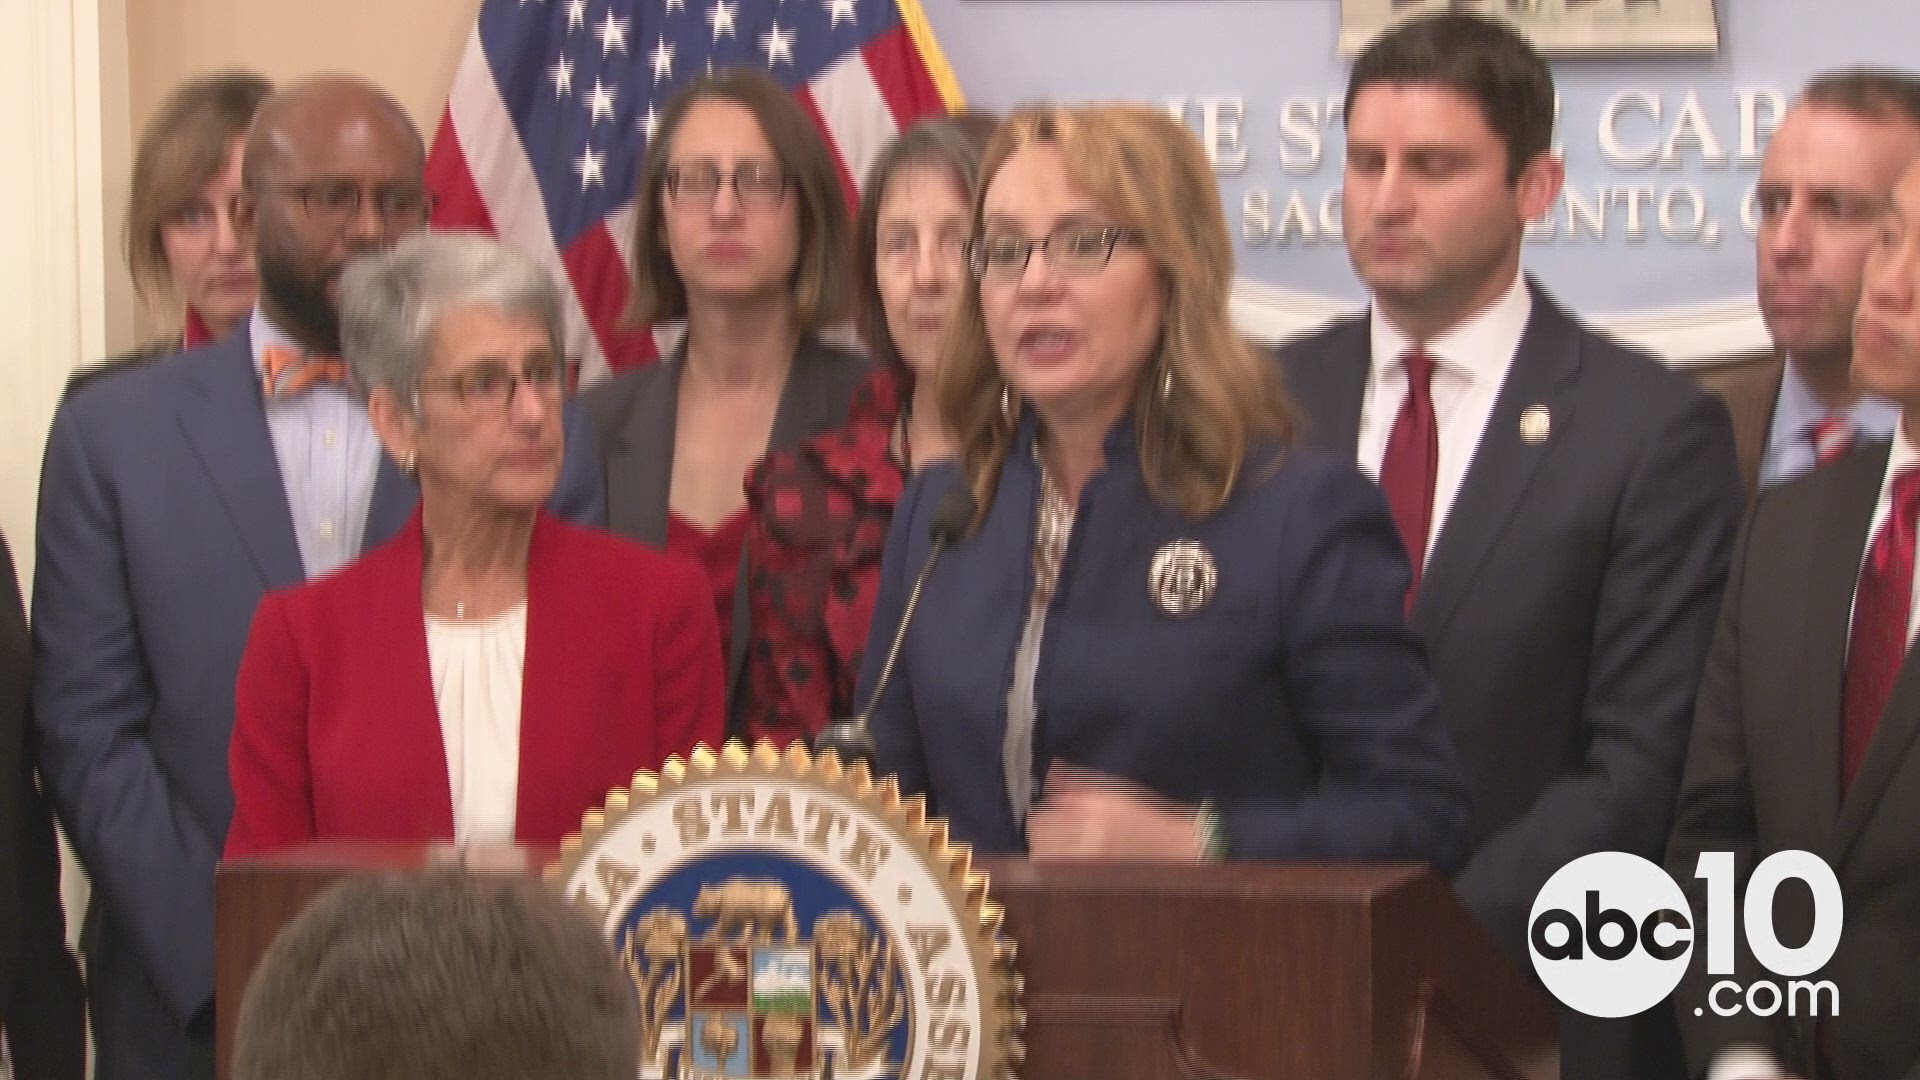 Former Congresswoman Gabrielle Giffords and other California legislators met at the State Capitol on Monday morning to announce plans for advocating for tighter gun control.